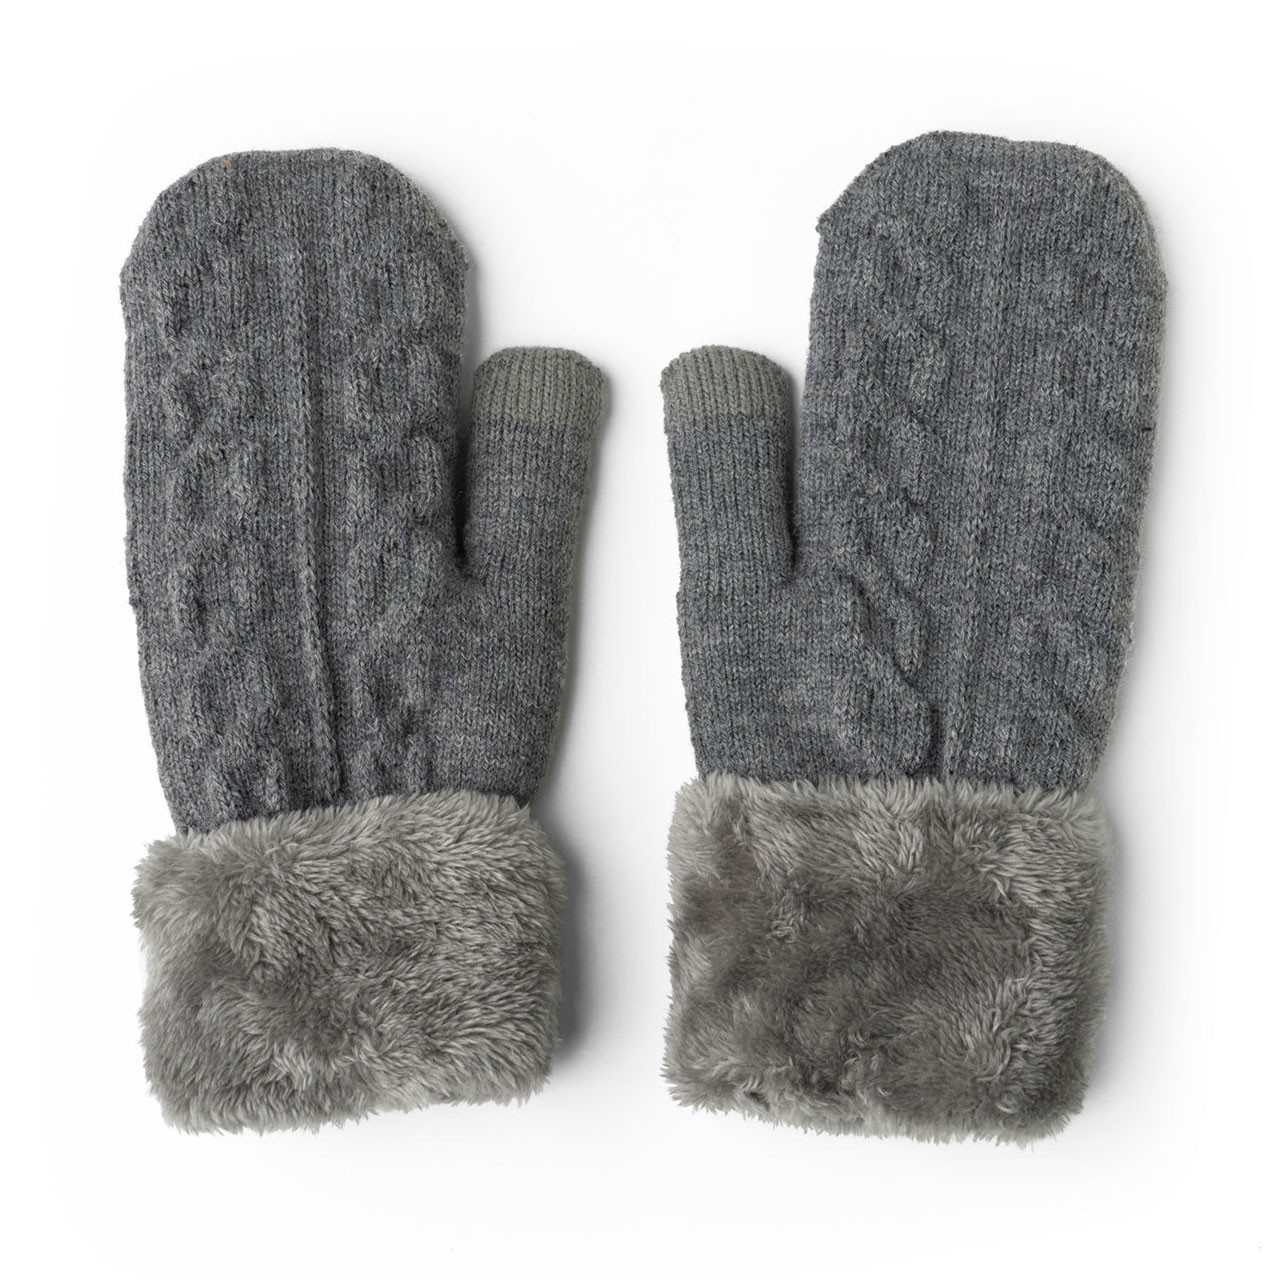 Gray Cable Knit Mittens